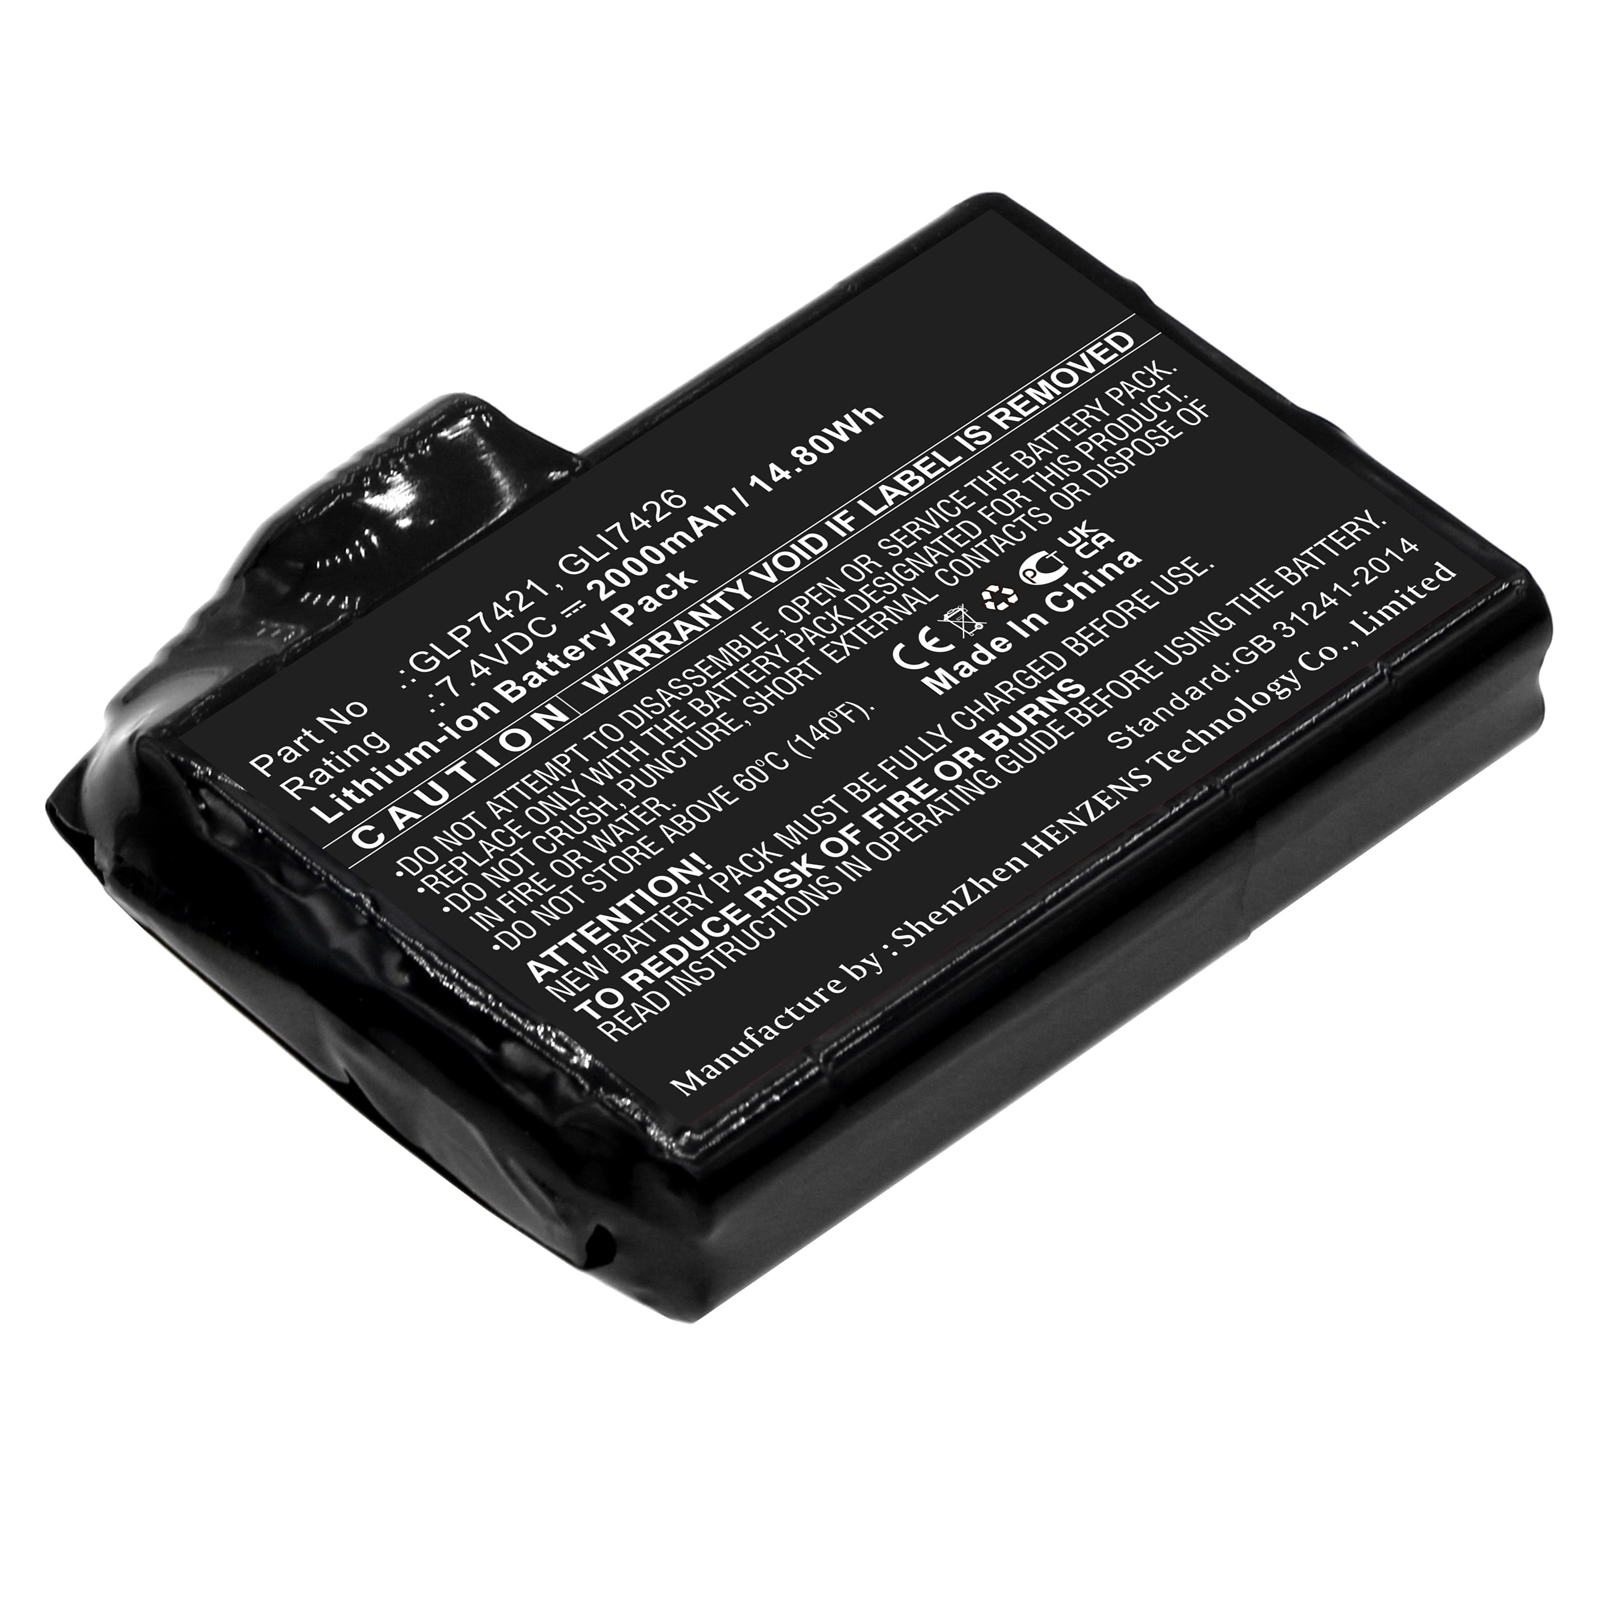 Synergy Digital Thermal Electric Battery, Compatible with Glovii GLI7426 Thermal Electric Battery (Li-ion, 7.4V, 2000mAh)